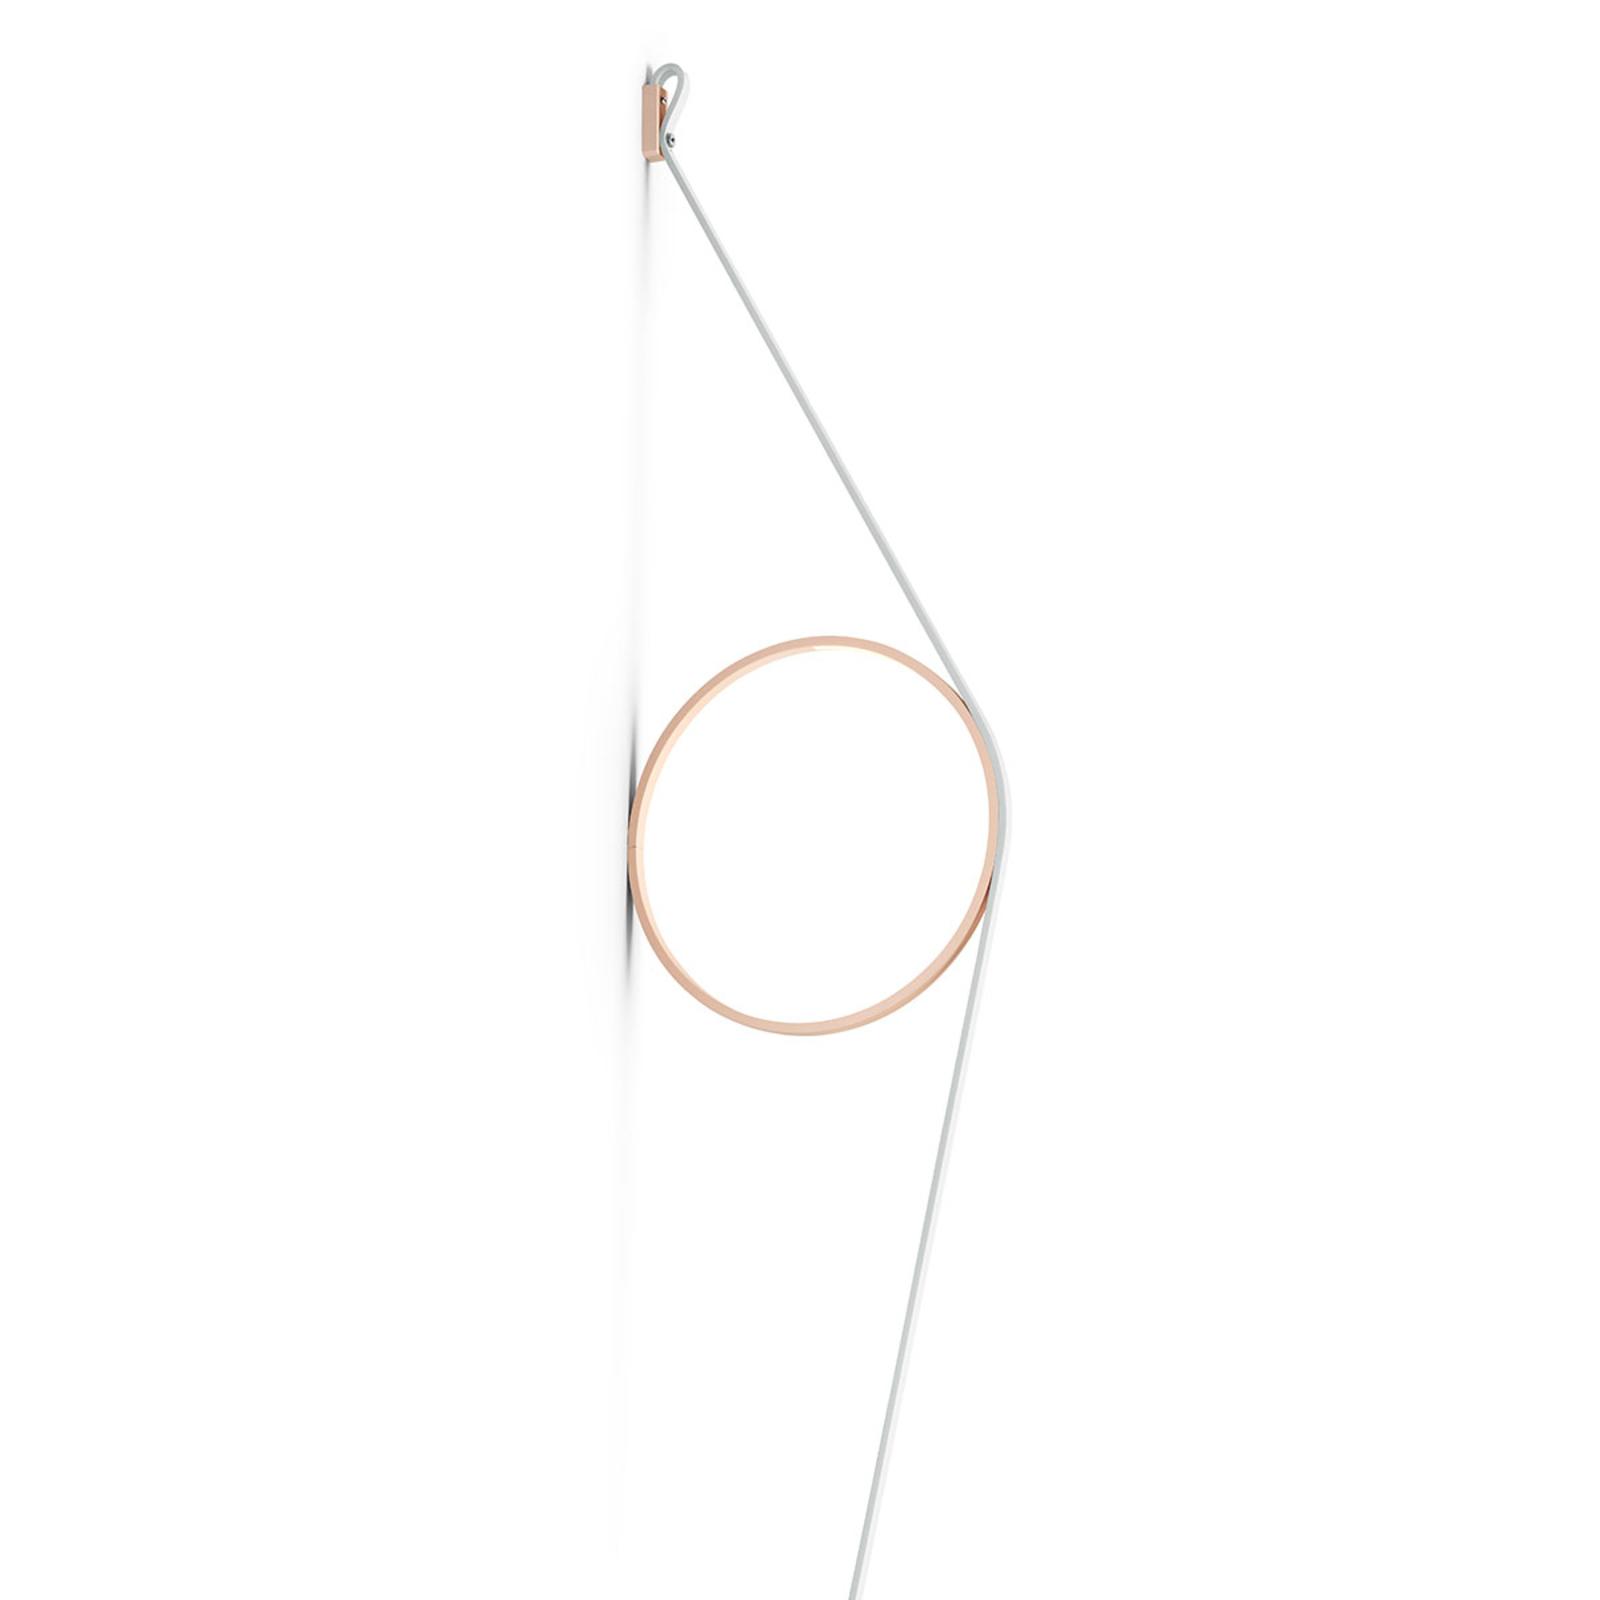 FLOS Wirering applique LED bianca, anello rosa